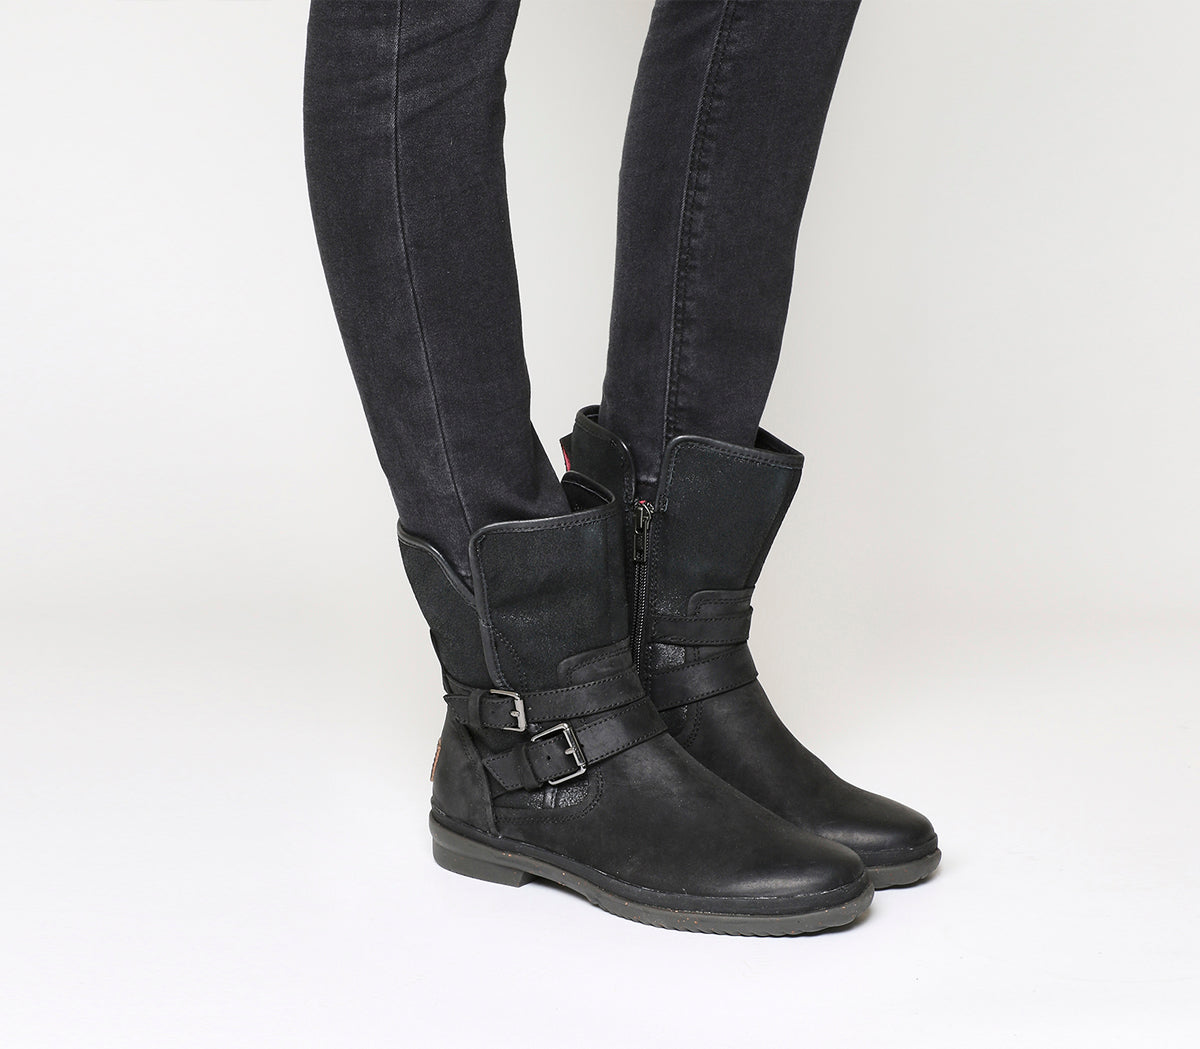 Womens Ugg Simmens Boot Black Suede 